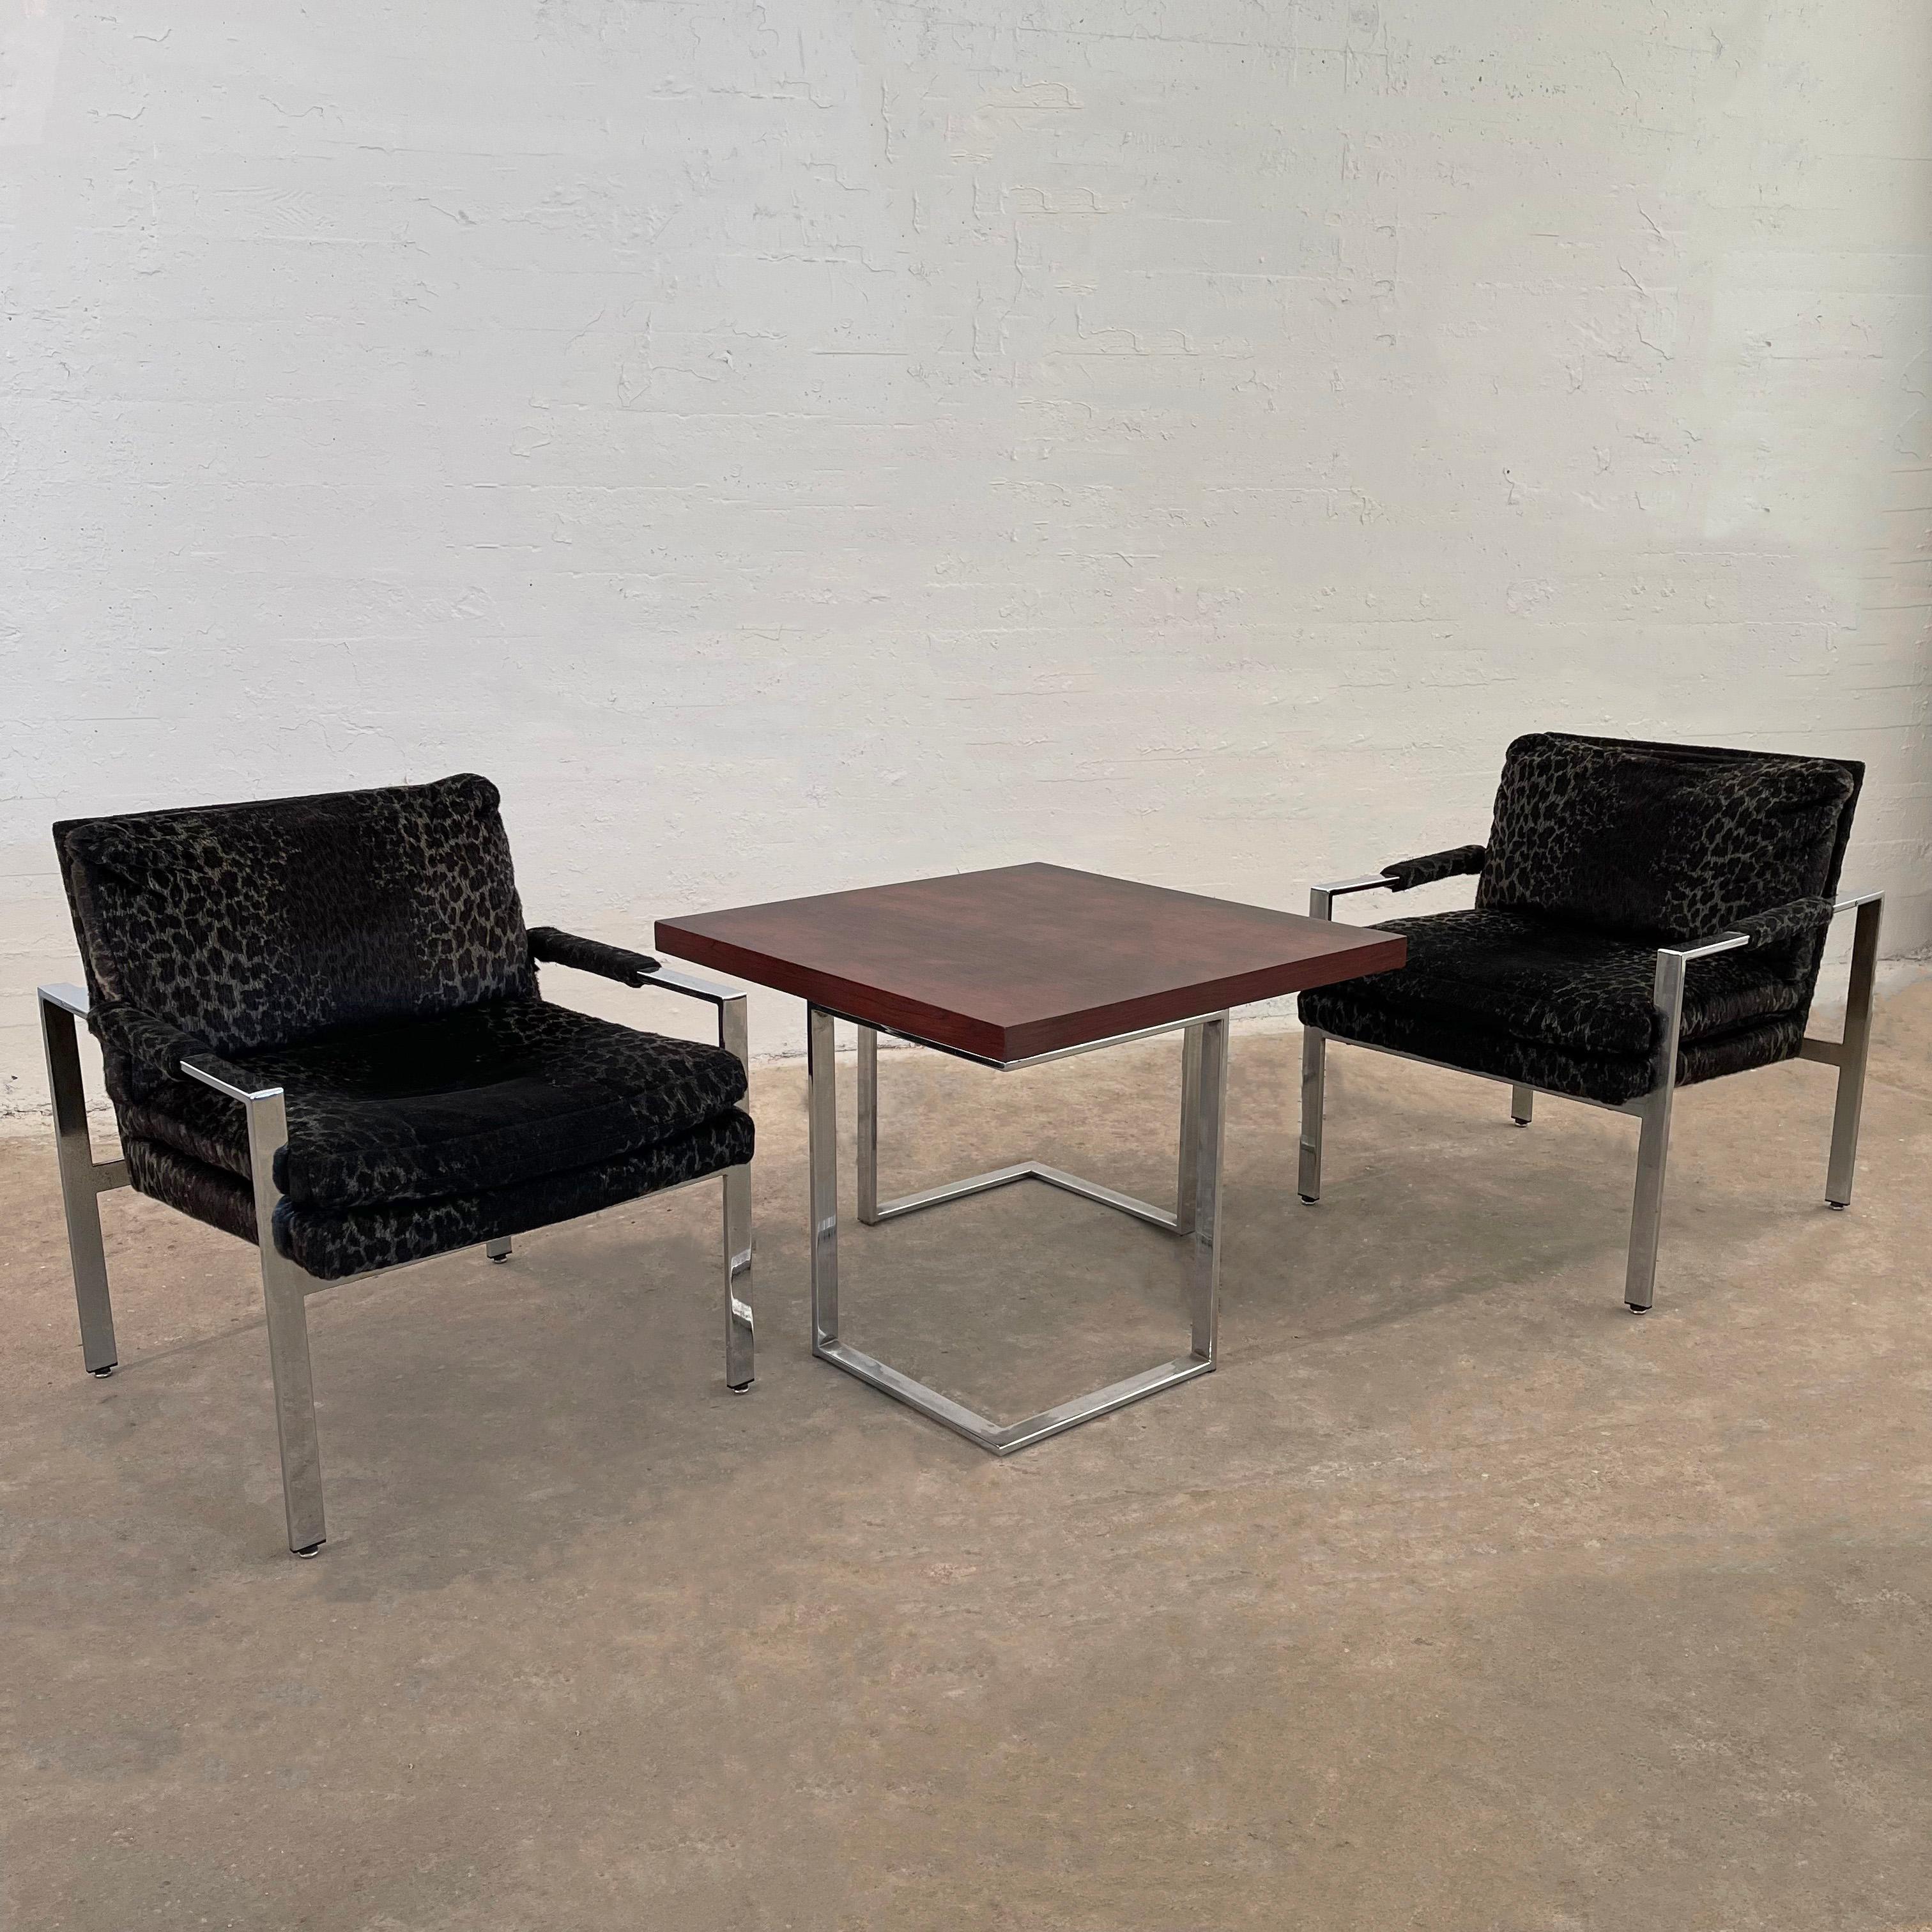 20th Century Milo Baughman For Thayer Coggin Upholstered Flat Bar Chrome Lounge Chairs For Sale